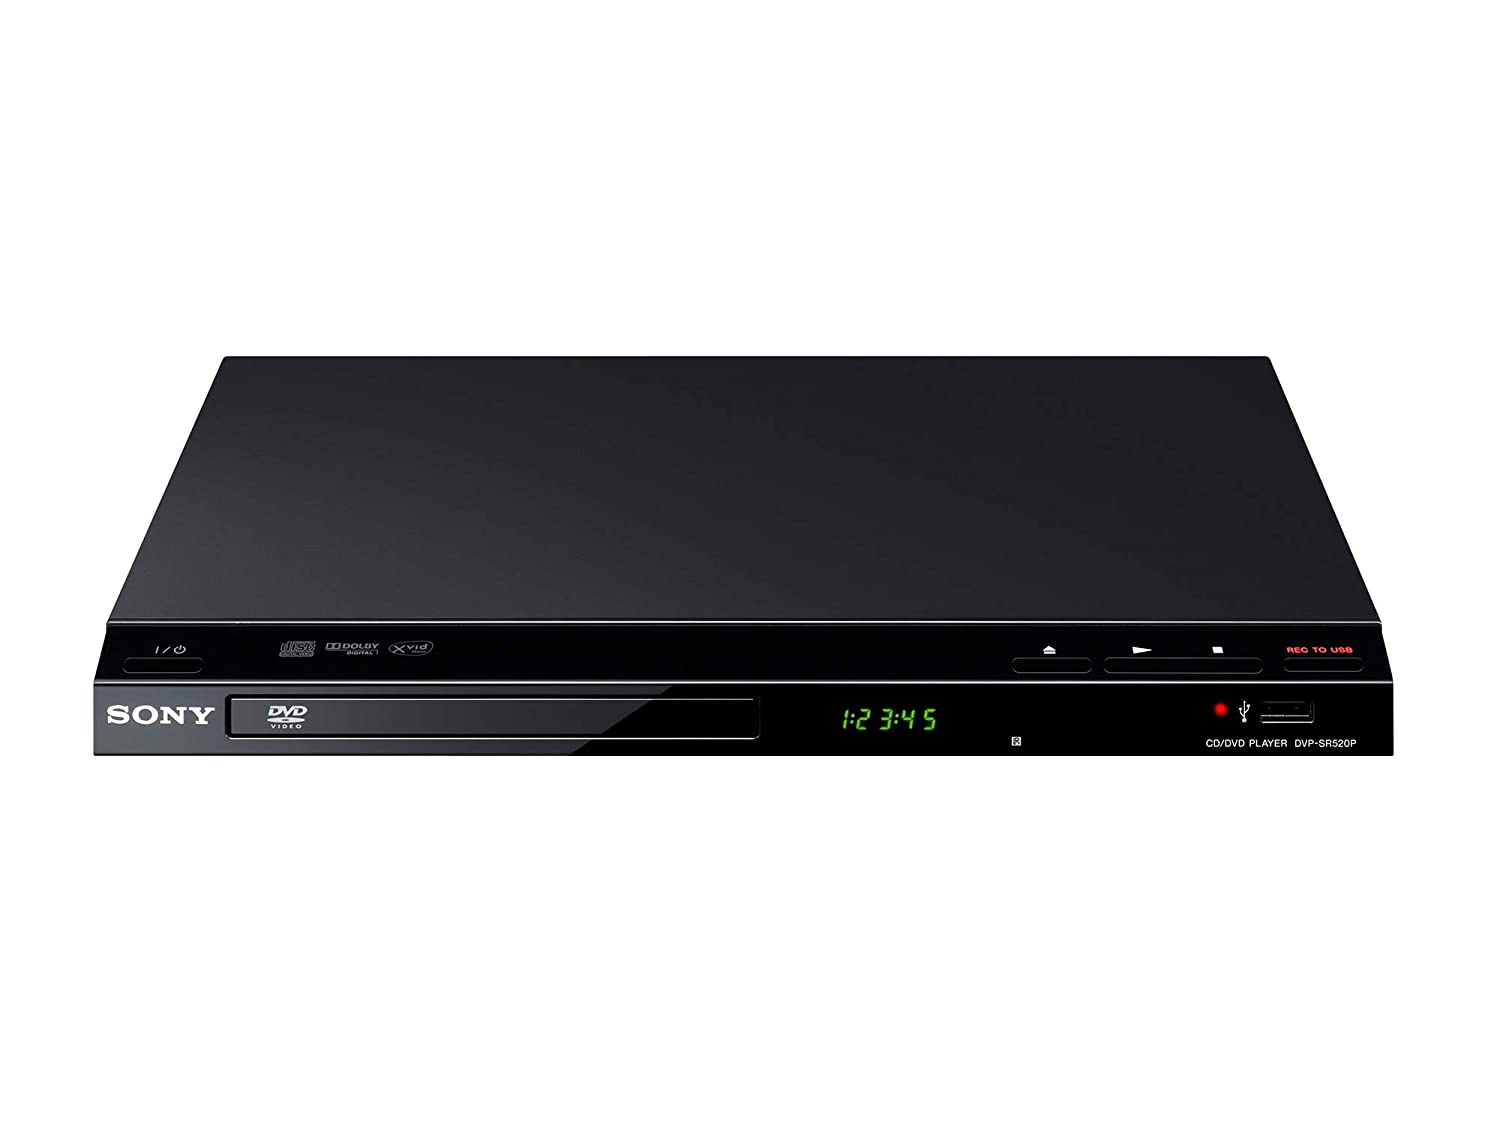 DVPSR520P/BCEA8/SONY DVD Player JPEG (USB),XVID,FAST/SLOW PLAY WITH AUDIO YES / BLACK